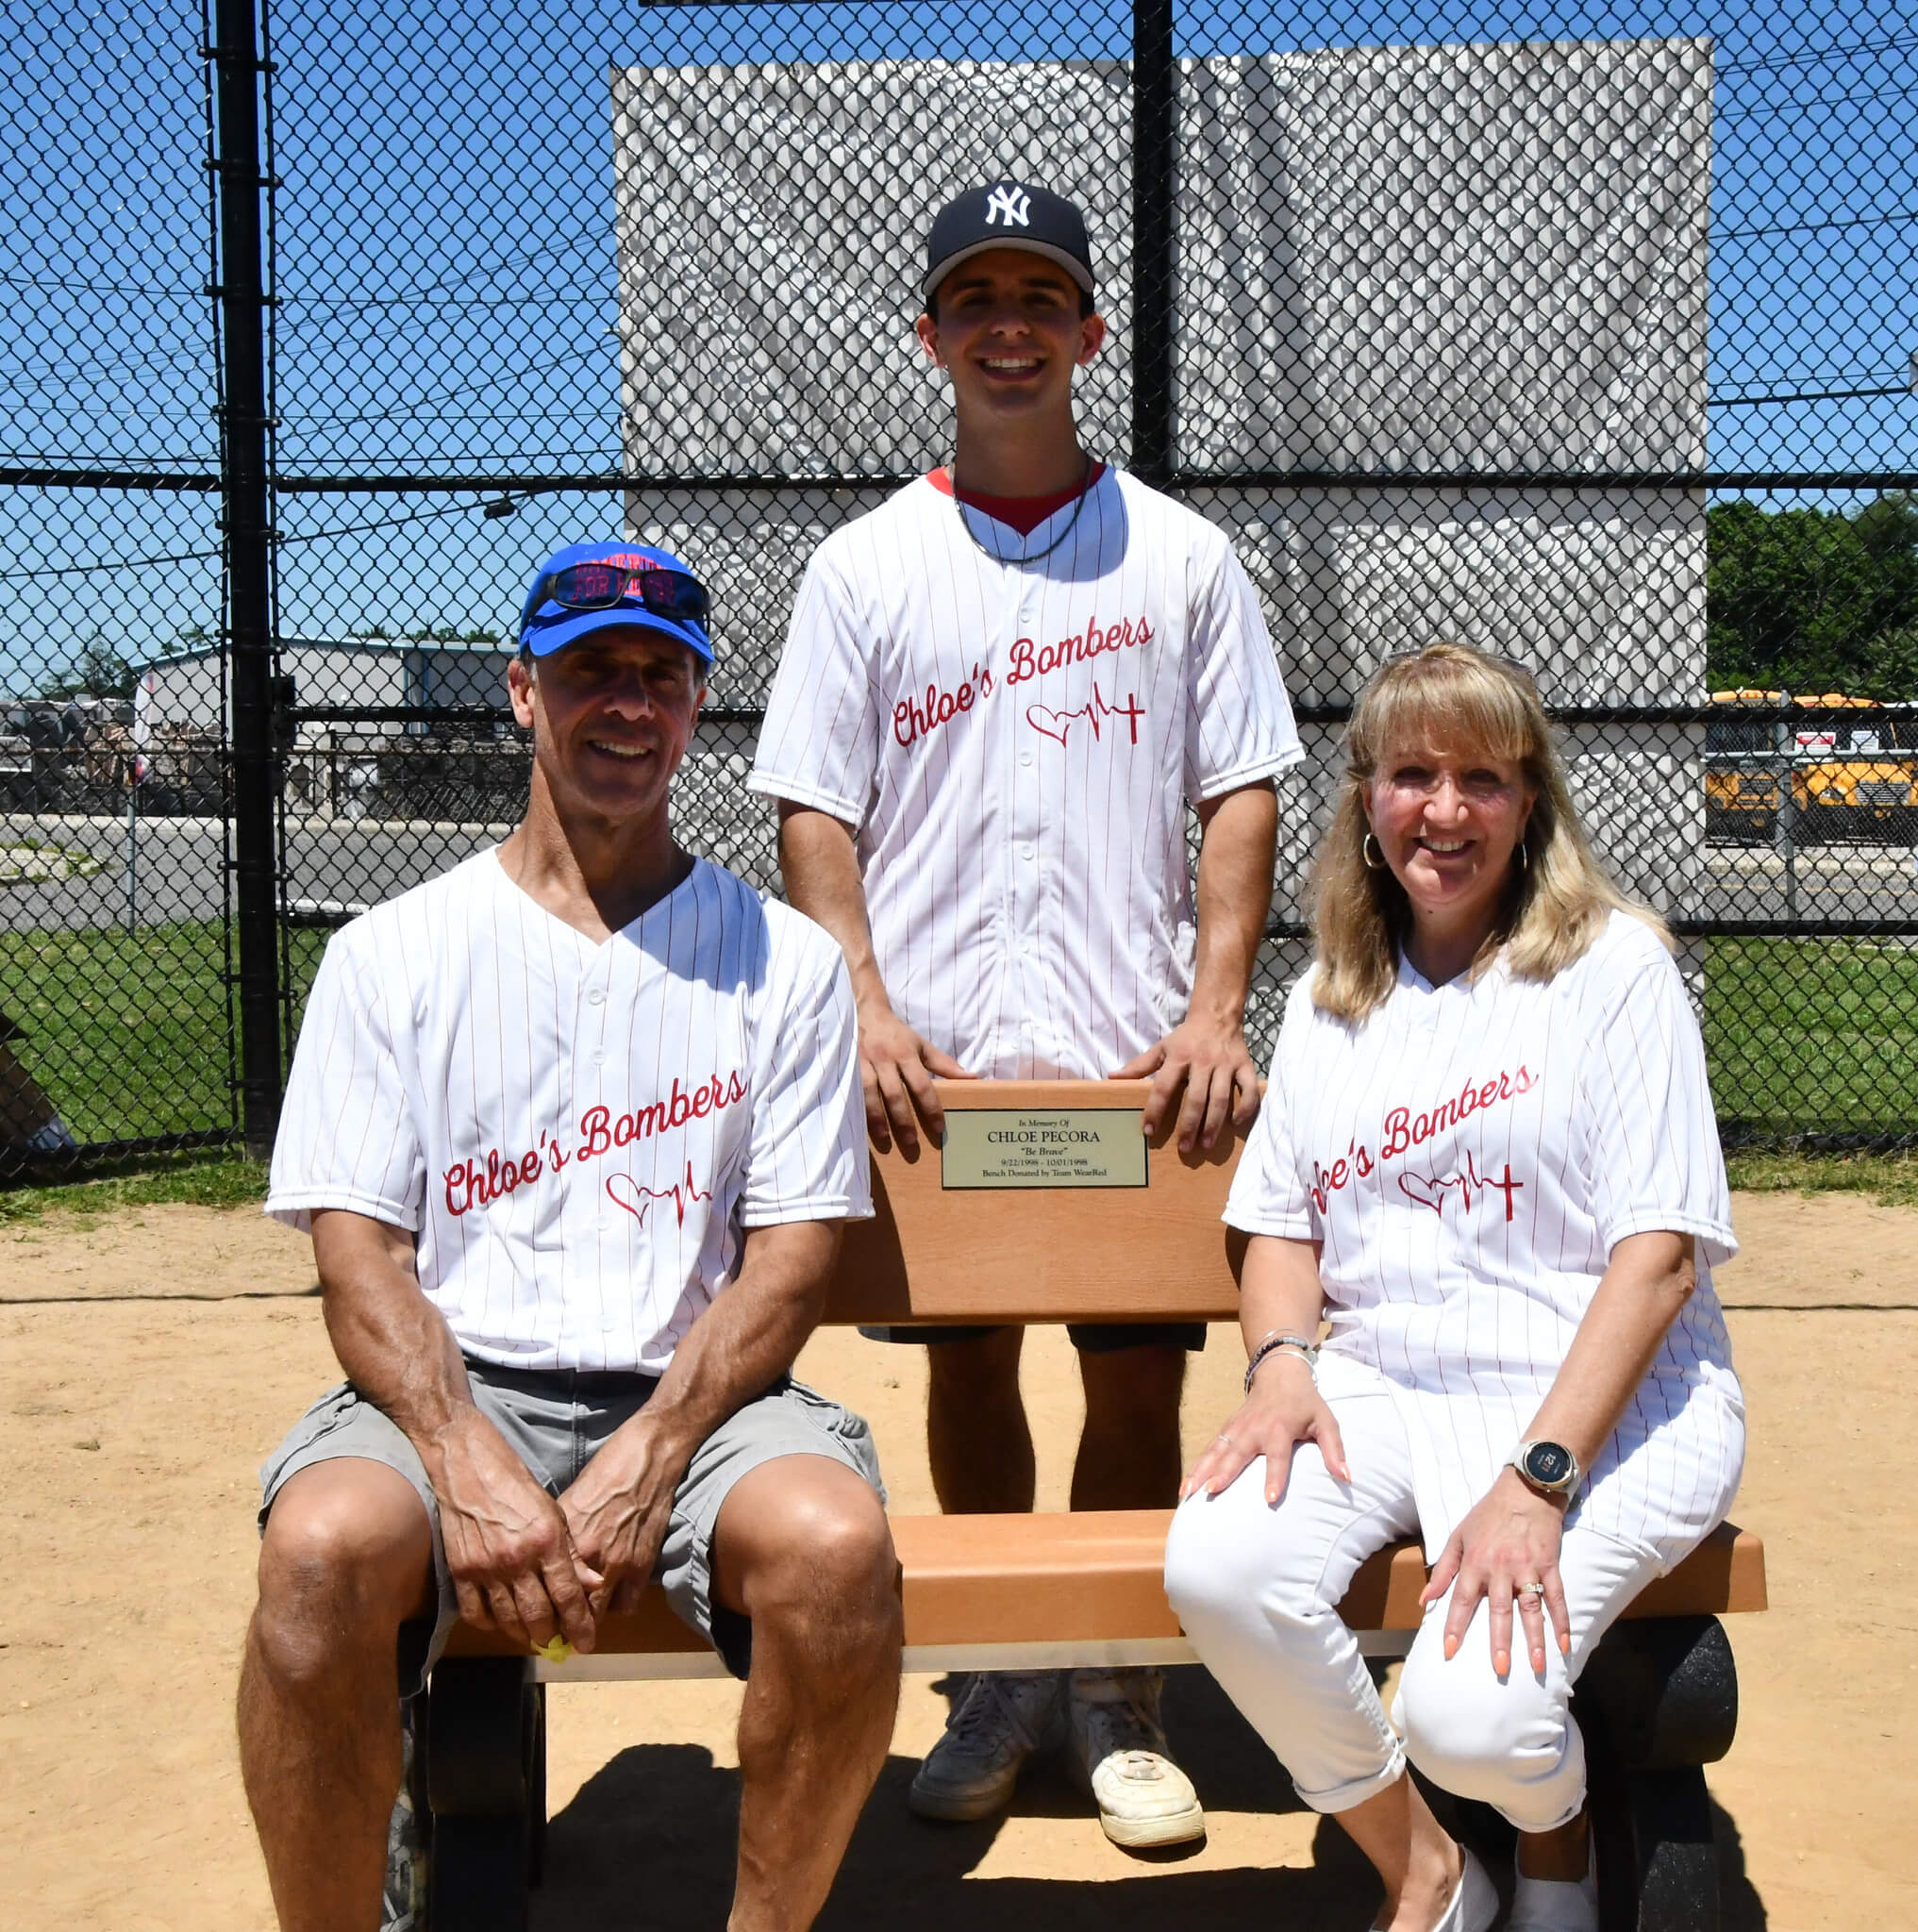 Image 5 Lenny Pecor Keith Pecora Jackie Pecora sitting on the bench named after their daughter Chloe